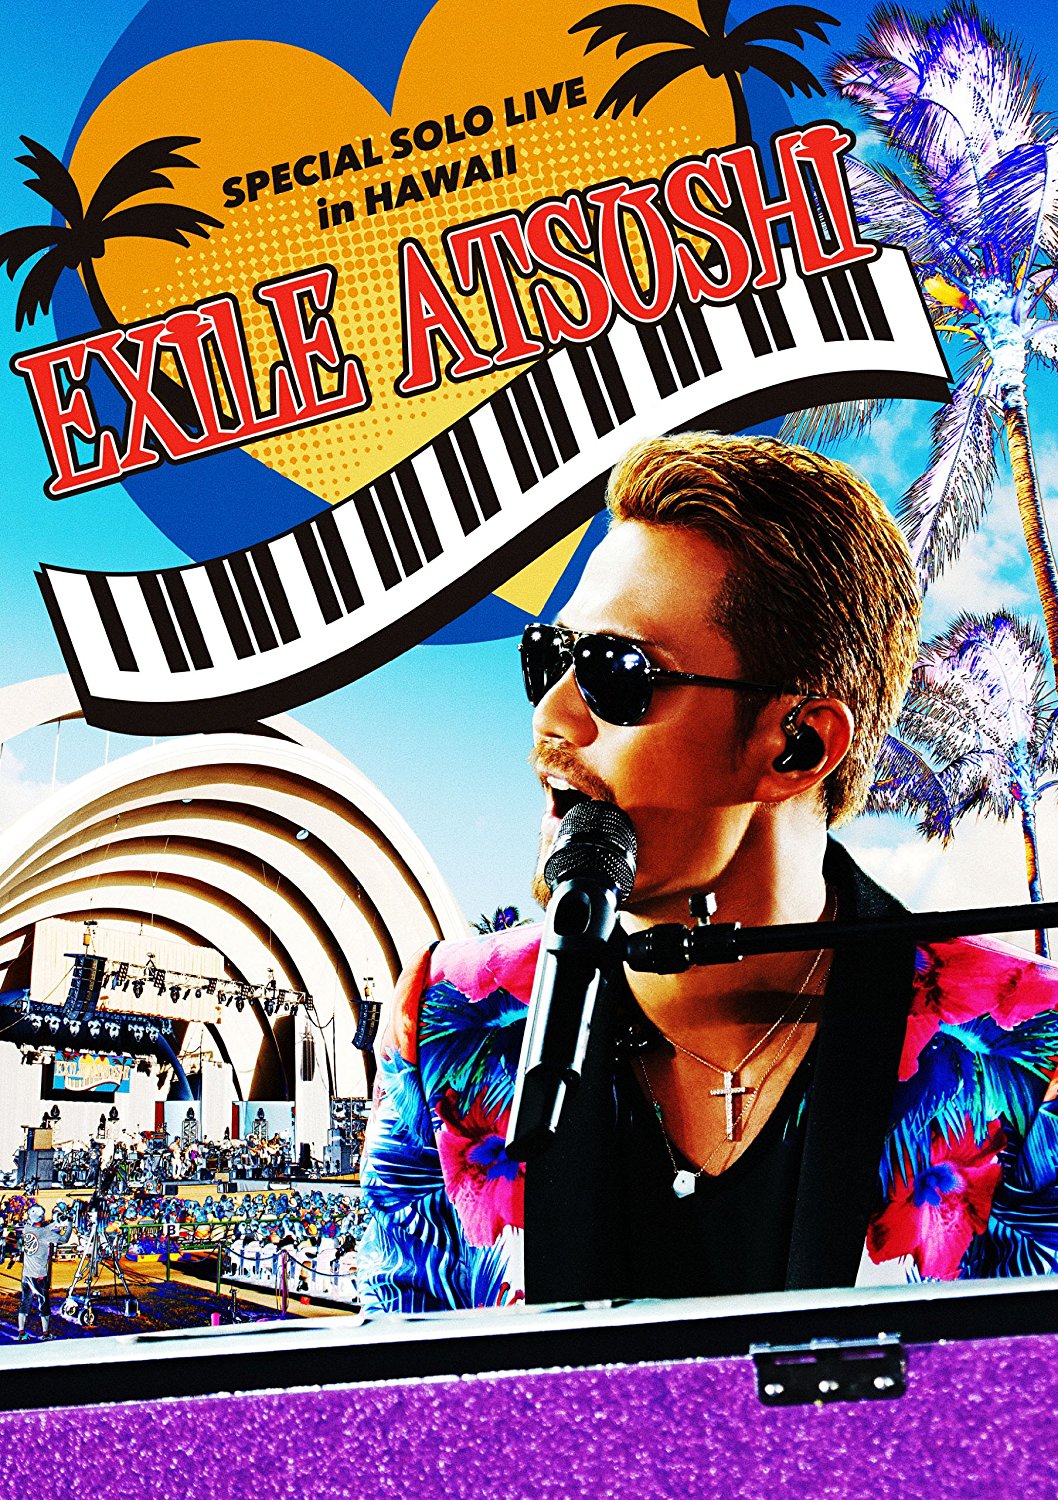 EXILE ATSUSHI SPECIAL SOLOLIVE in HAWAII 通販